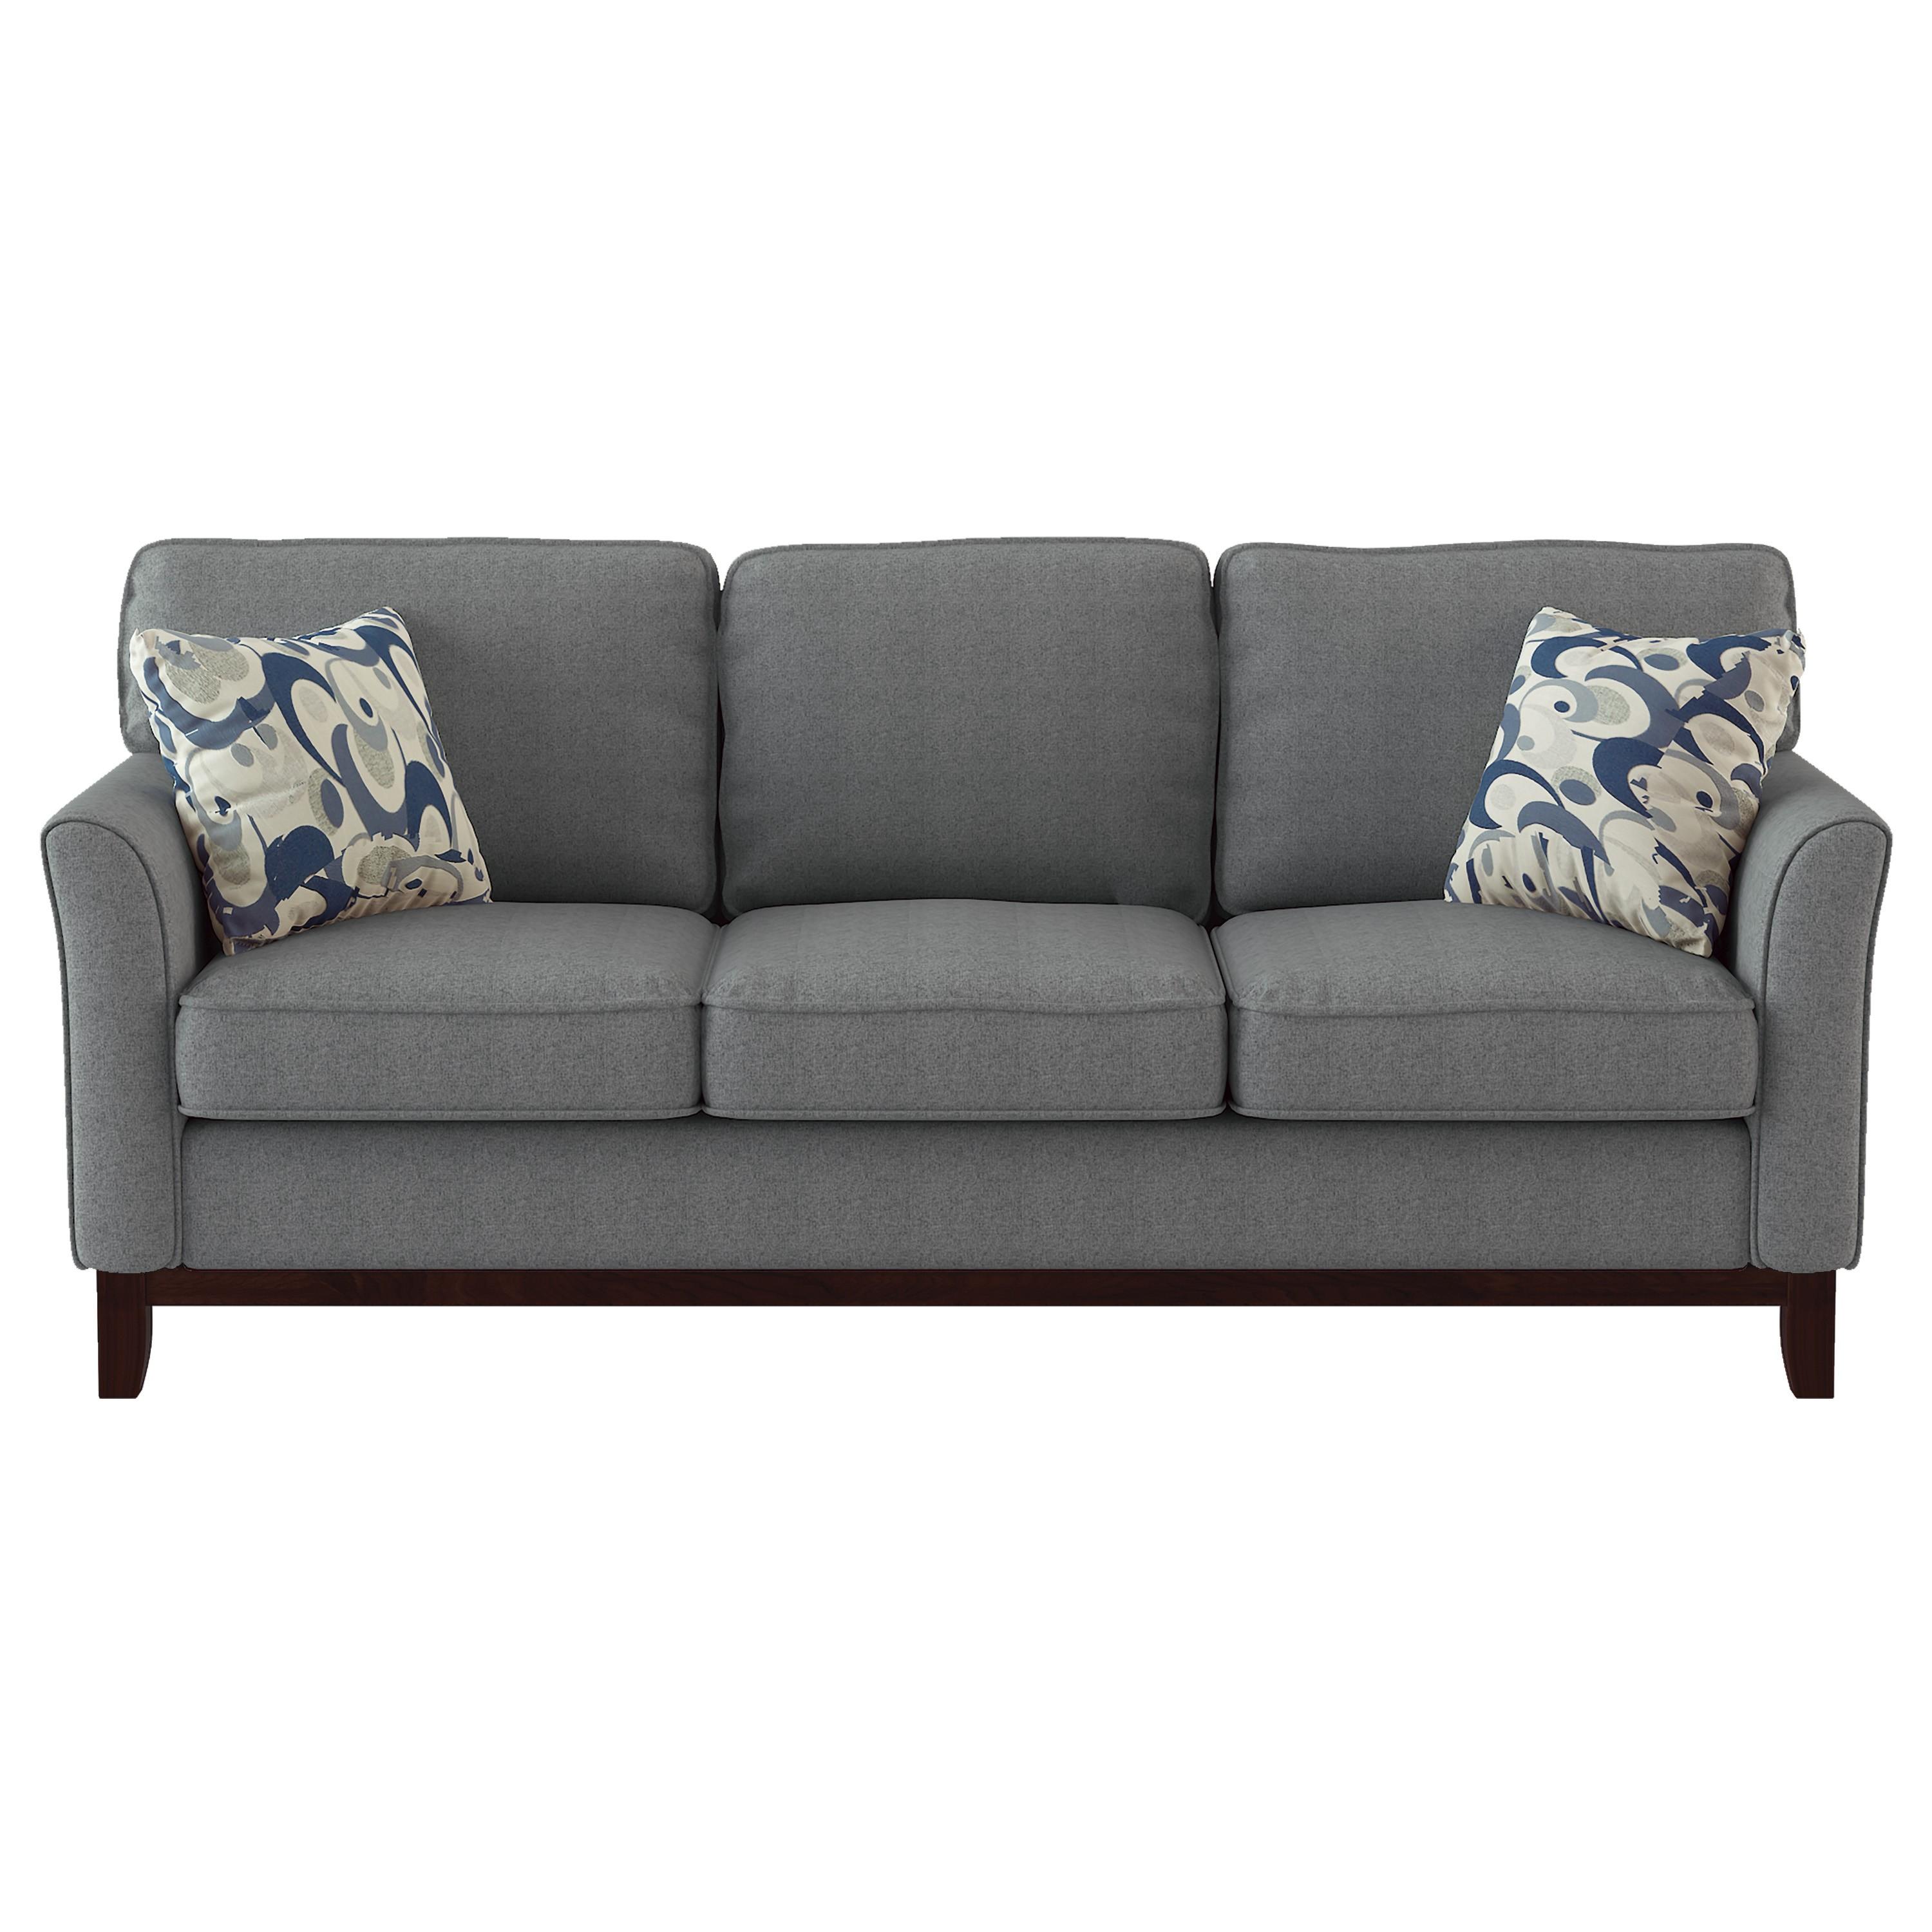 Classic Sofa 9806GRY-3 Blue Lake 9806GRY-3 in Gray 